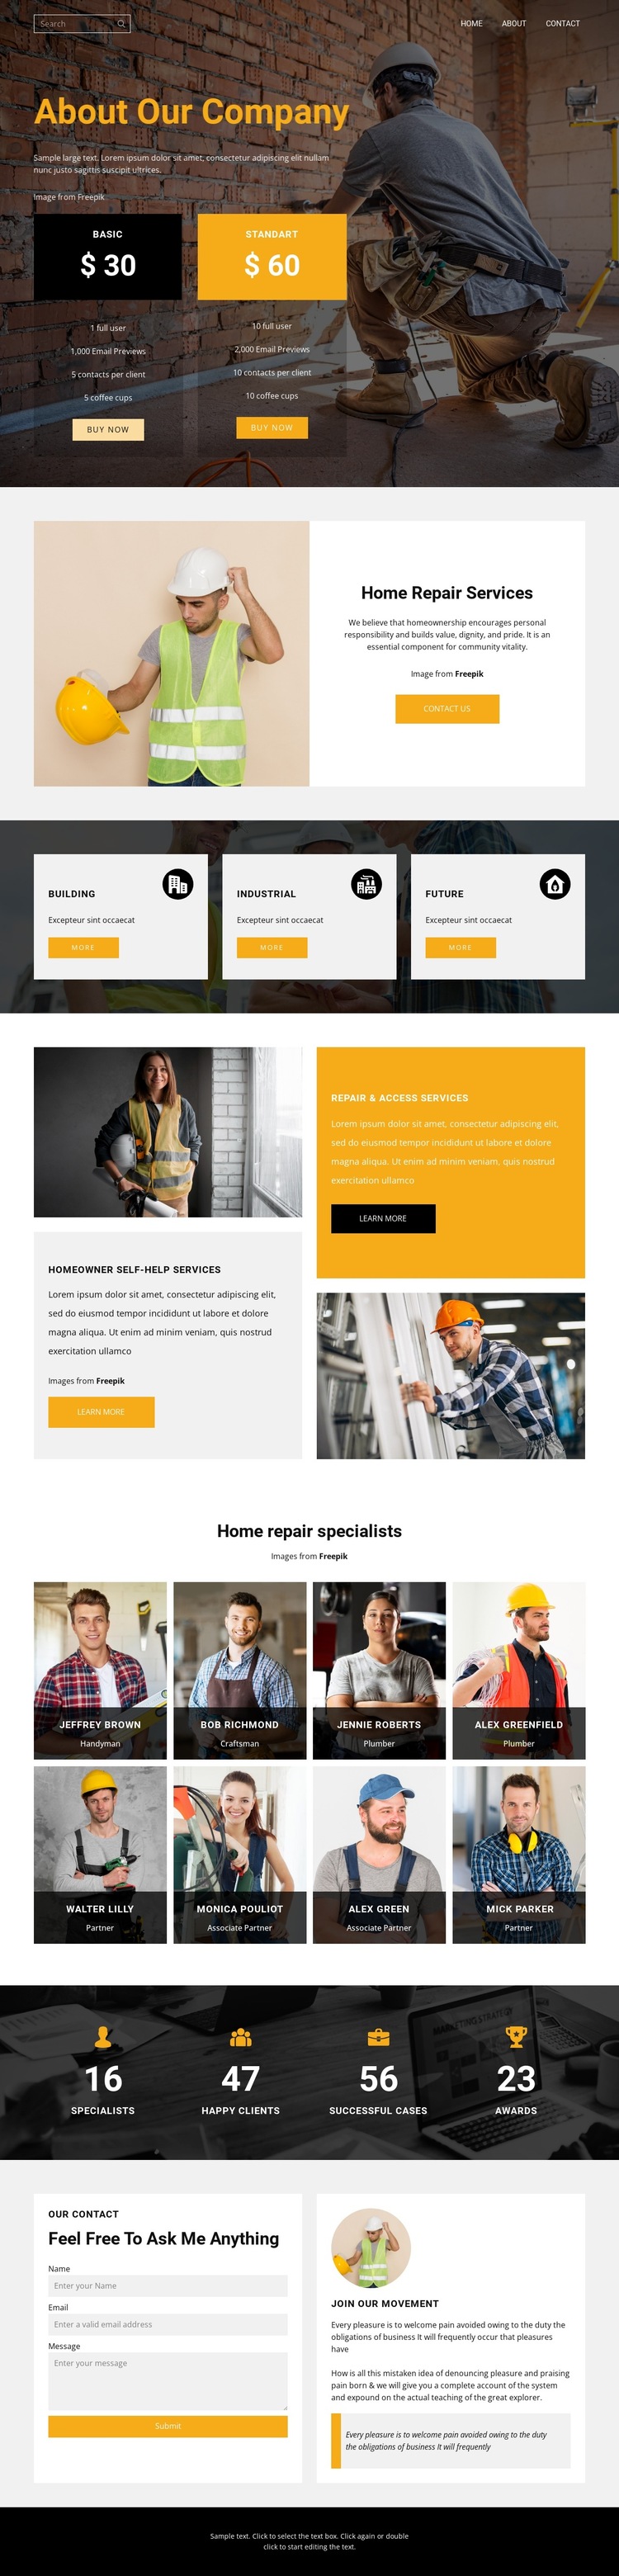 We will build a better home HTML5 Template